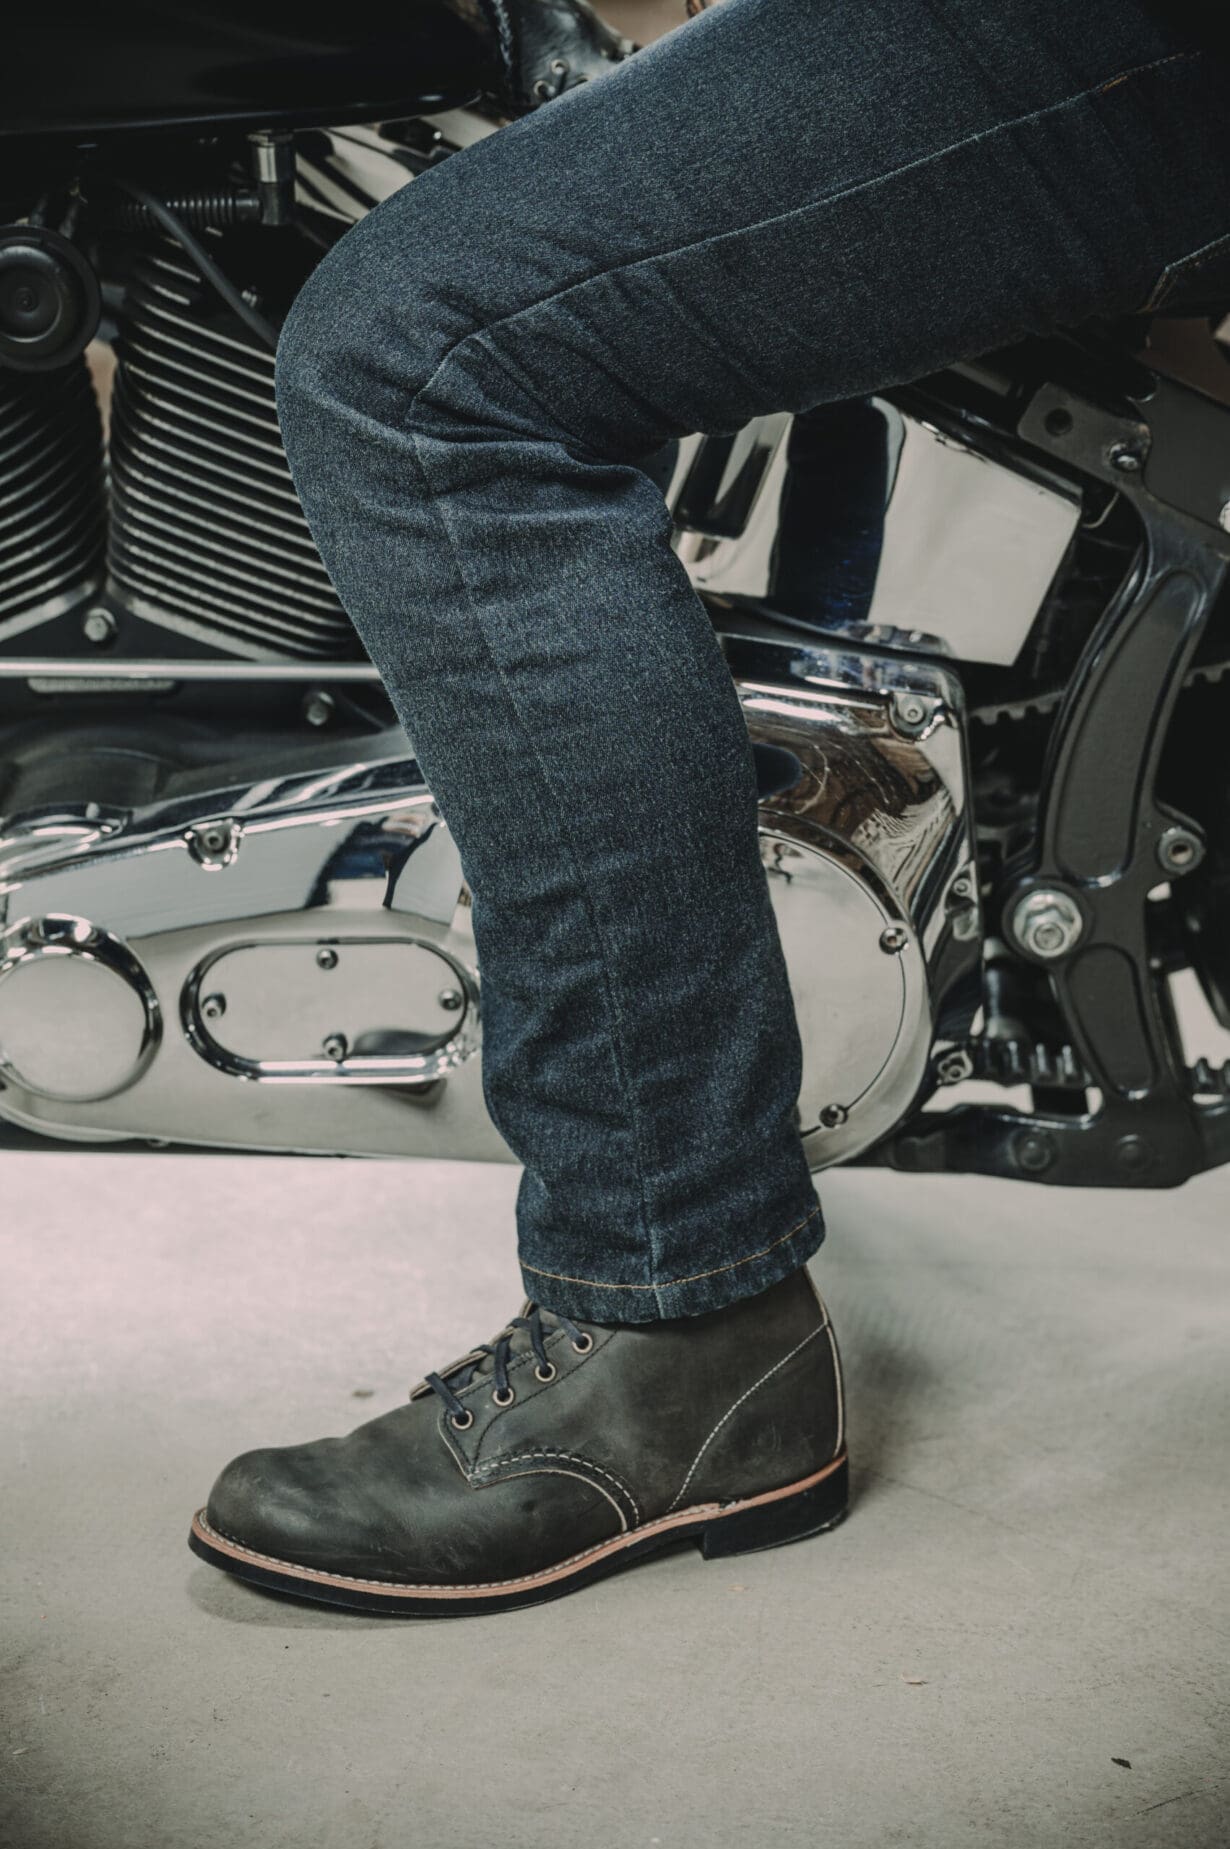 Paranoid X - AAA-rated armoured motorcycle jeans from Roadskin